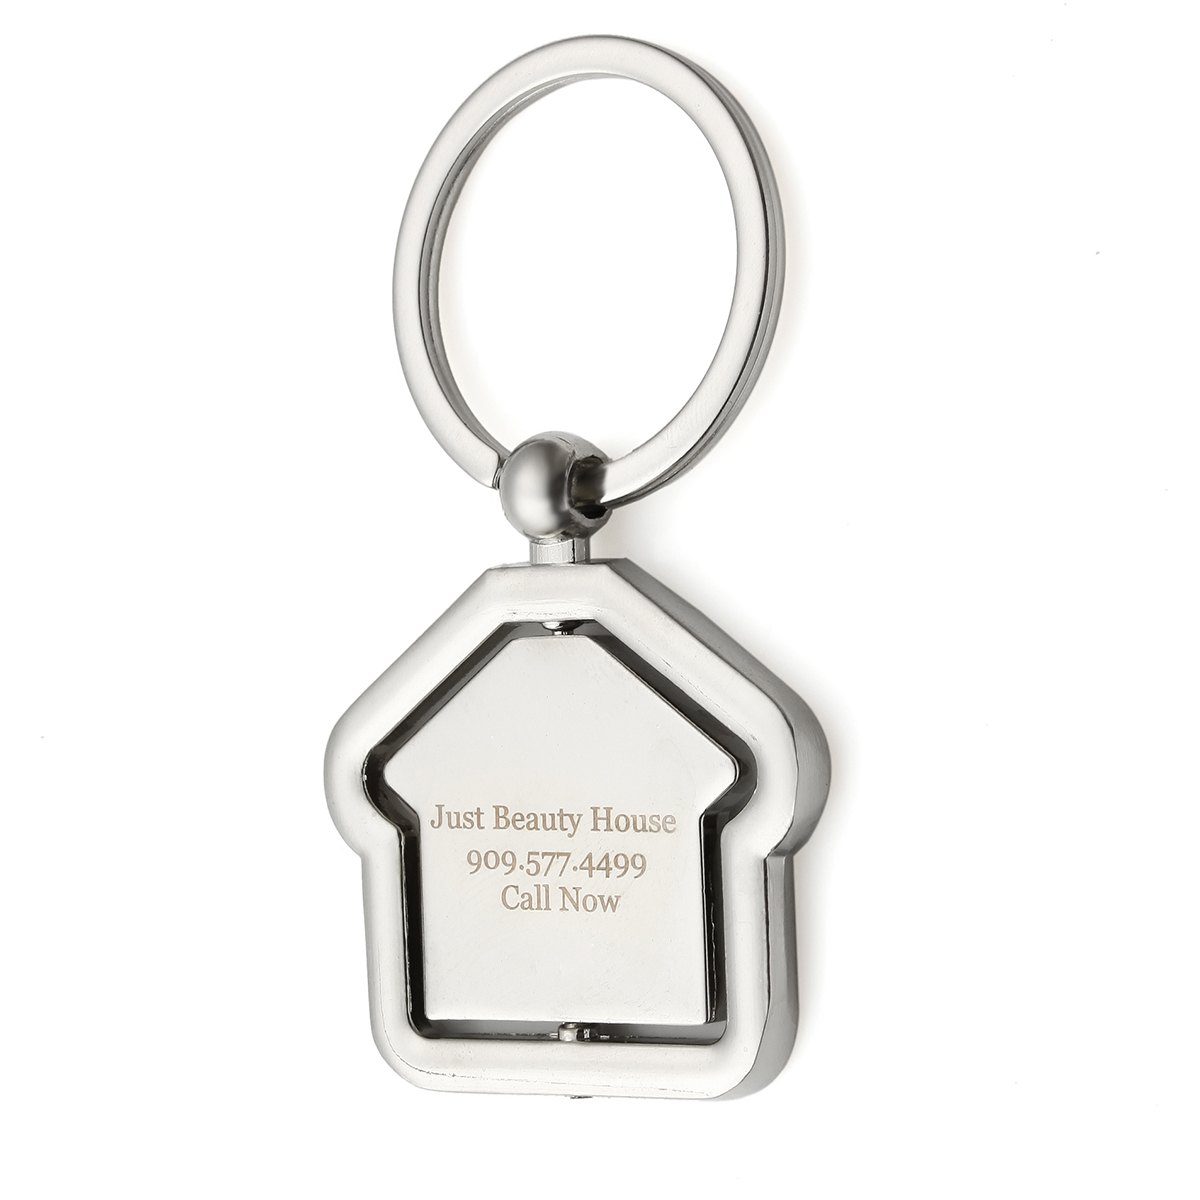 Personalized House Design Key Chains 360 Degree Rotational Keychains Promotion Gifts Party Giveaways Event Keepsake